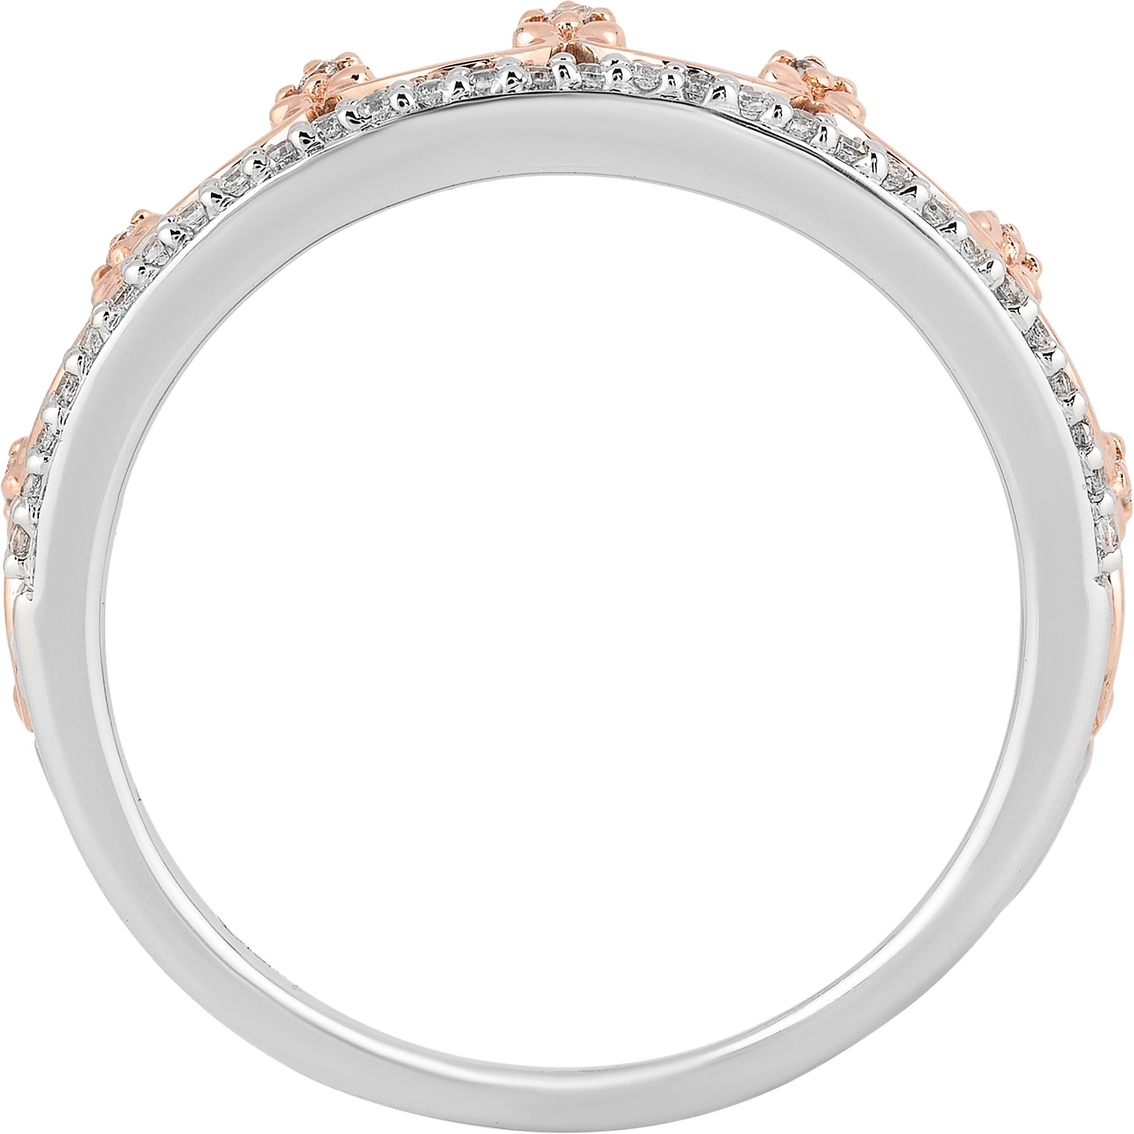 Disney Enchanted 14K Rose Gold Over Sterling Silver 1/10 CTW Diamond Ring, Size 7 - Image 4 of 4